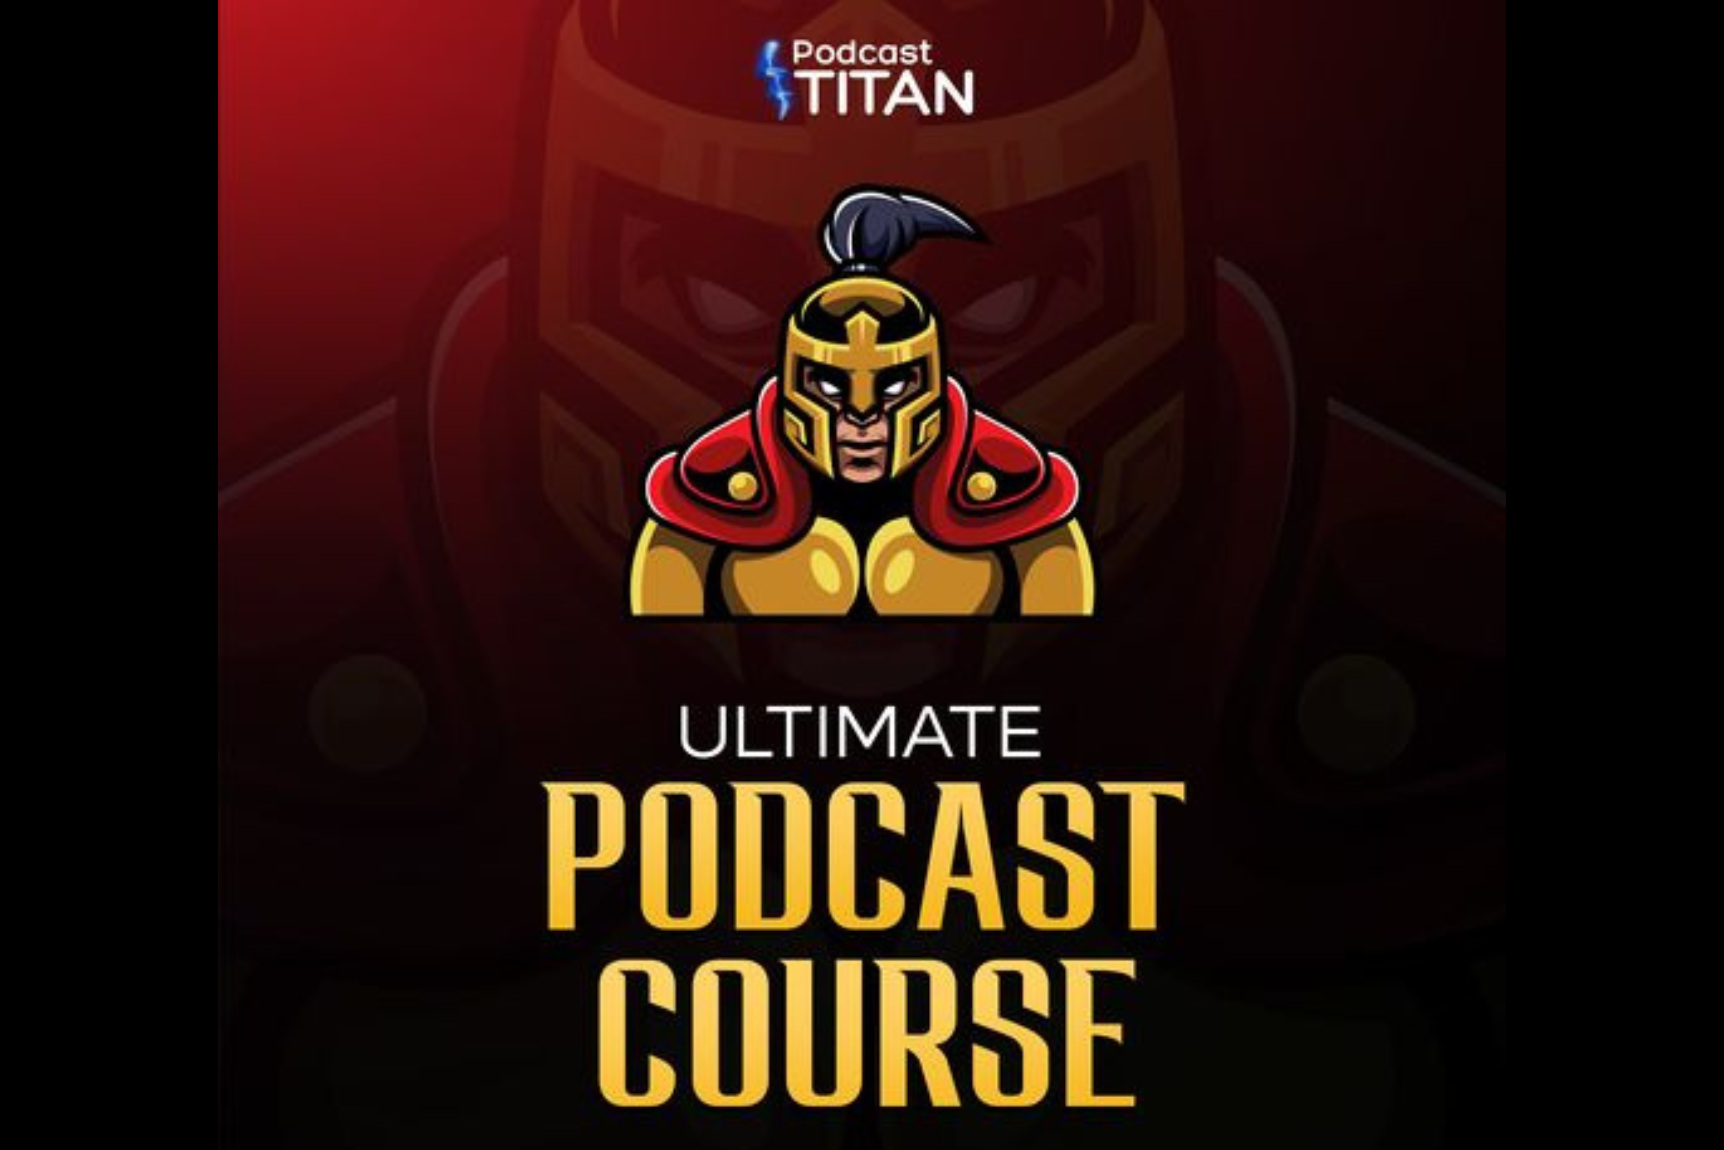 How to Become a Podcast Titan